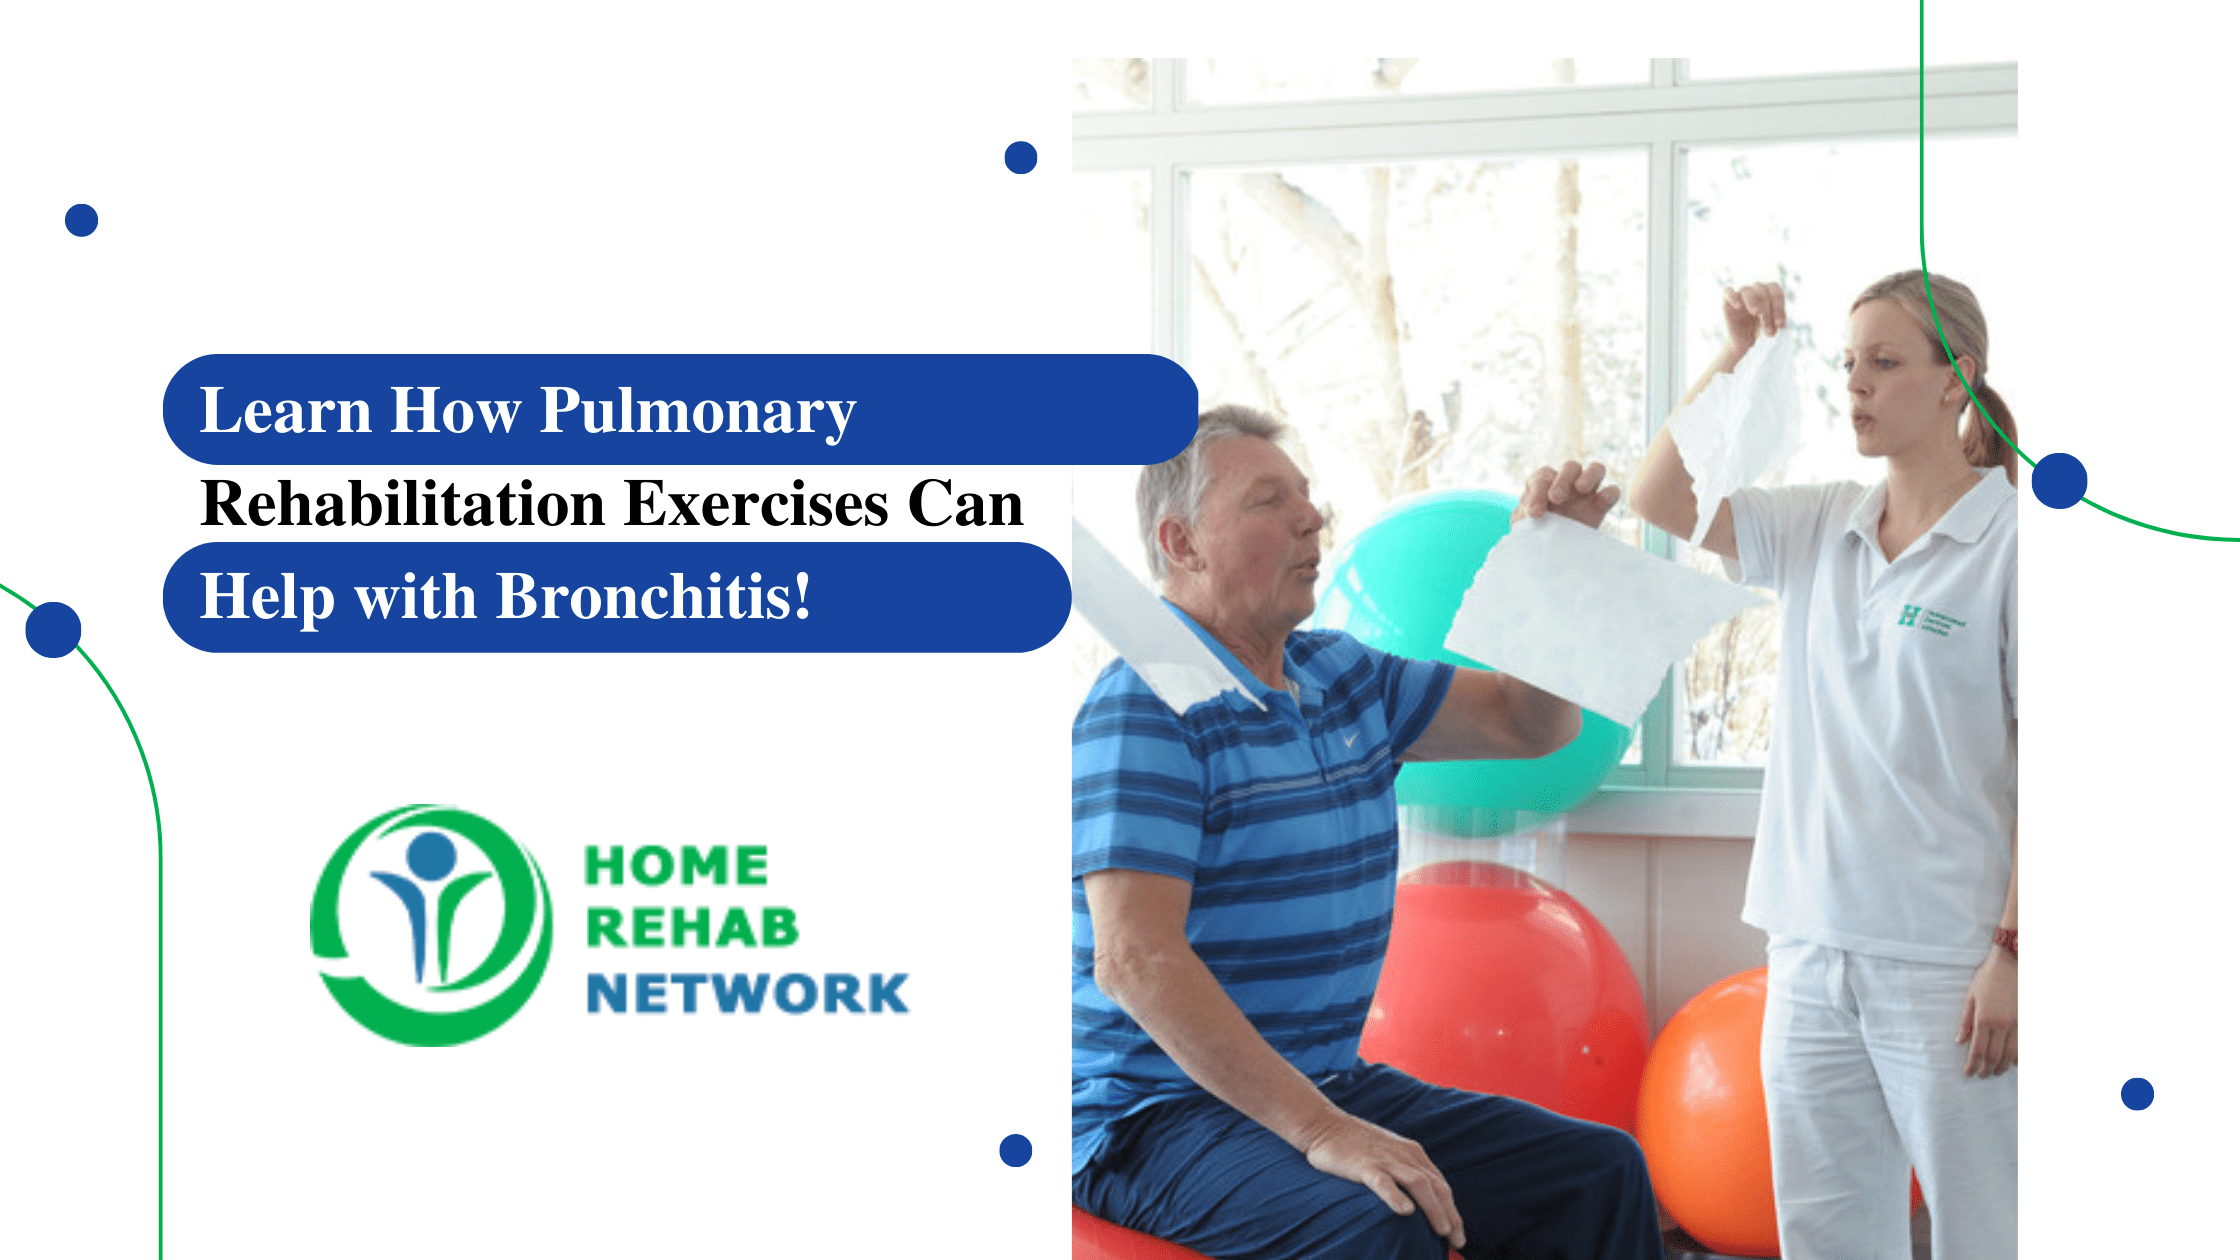 Learn How Pulmonary Rehabilitation Exercises Can Help with Bronchitis